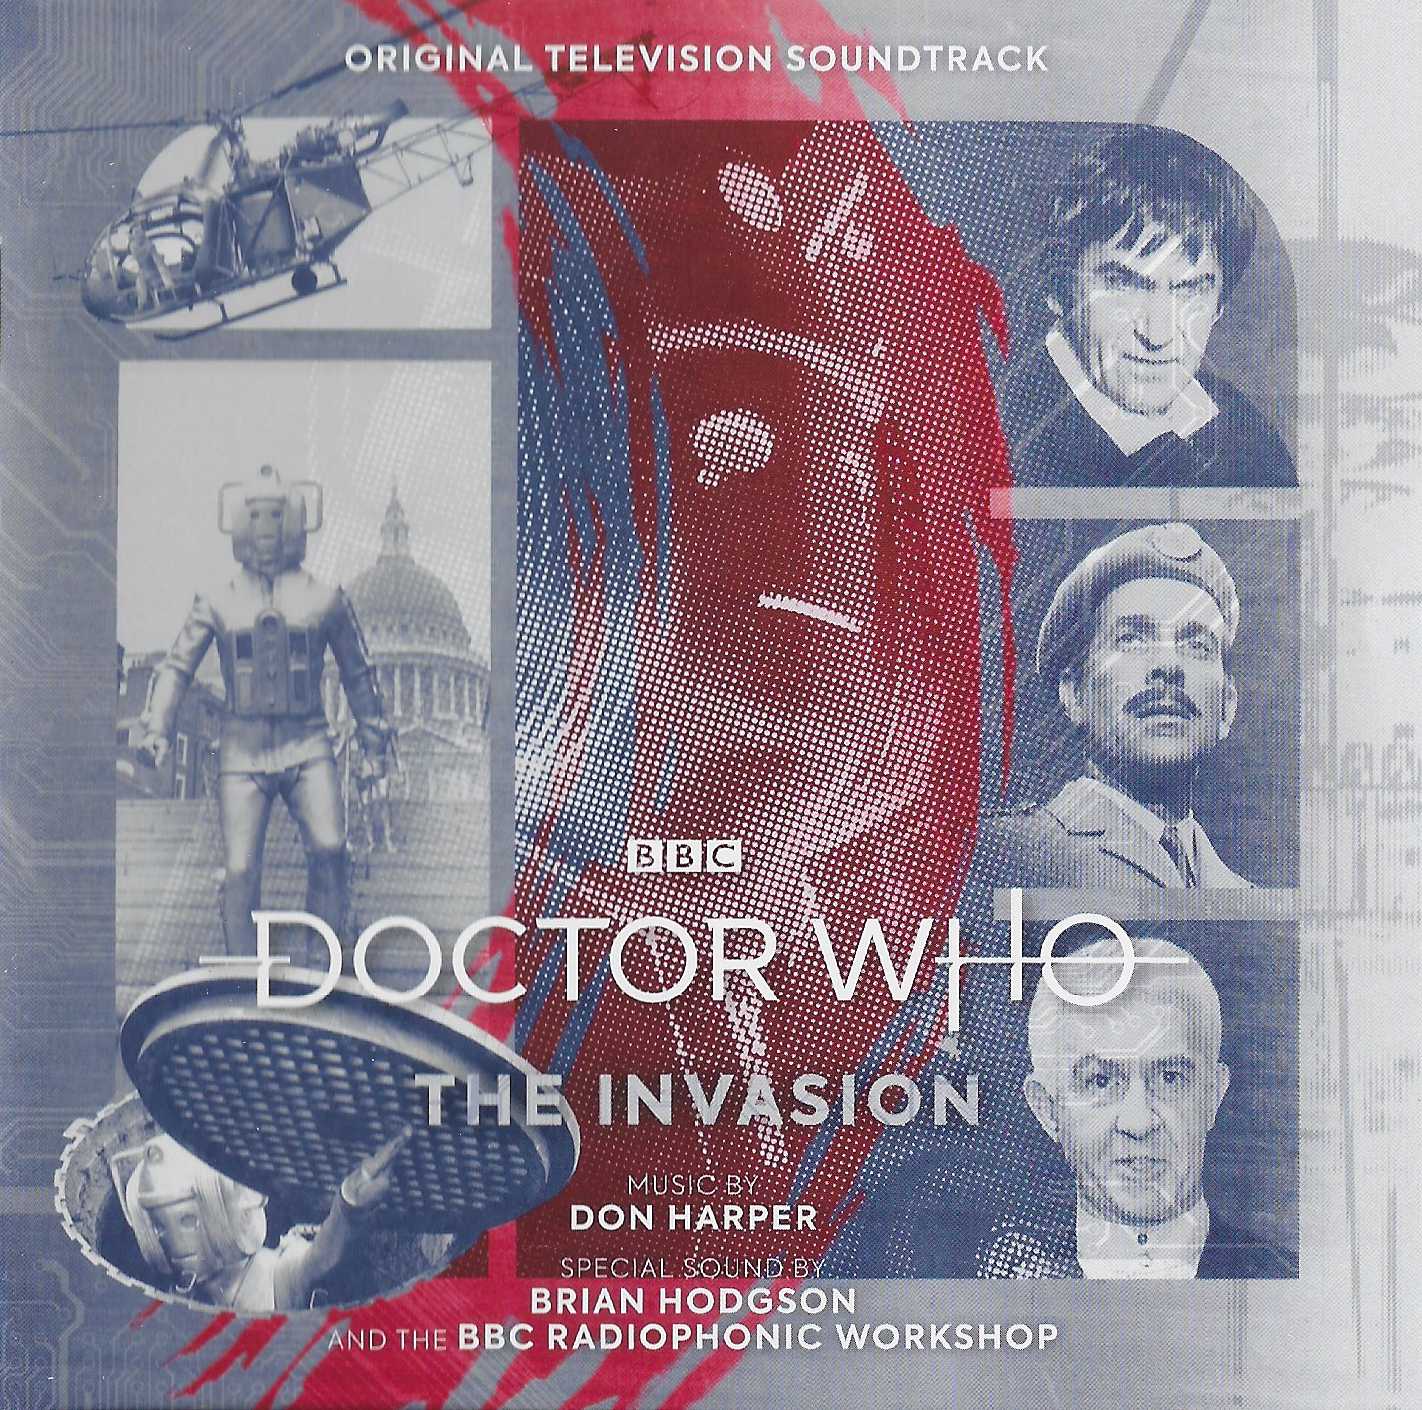 Picture of SILCD 1552 Doctor Who - The invasion by artist Don Harper from the BBC records and Tapes library